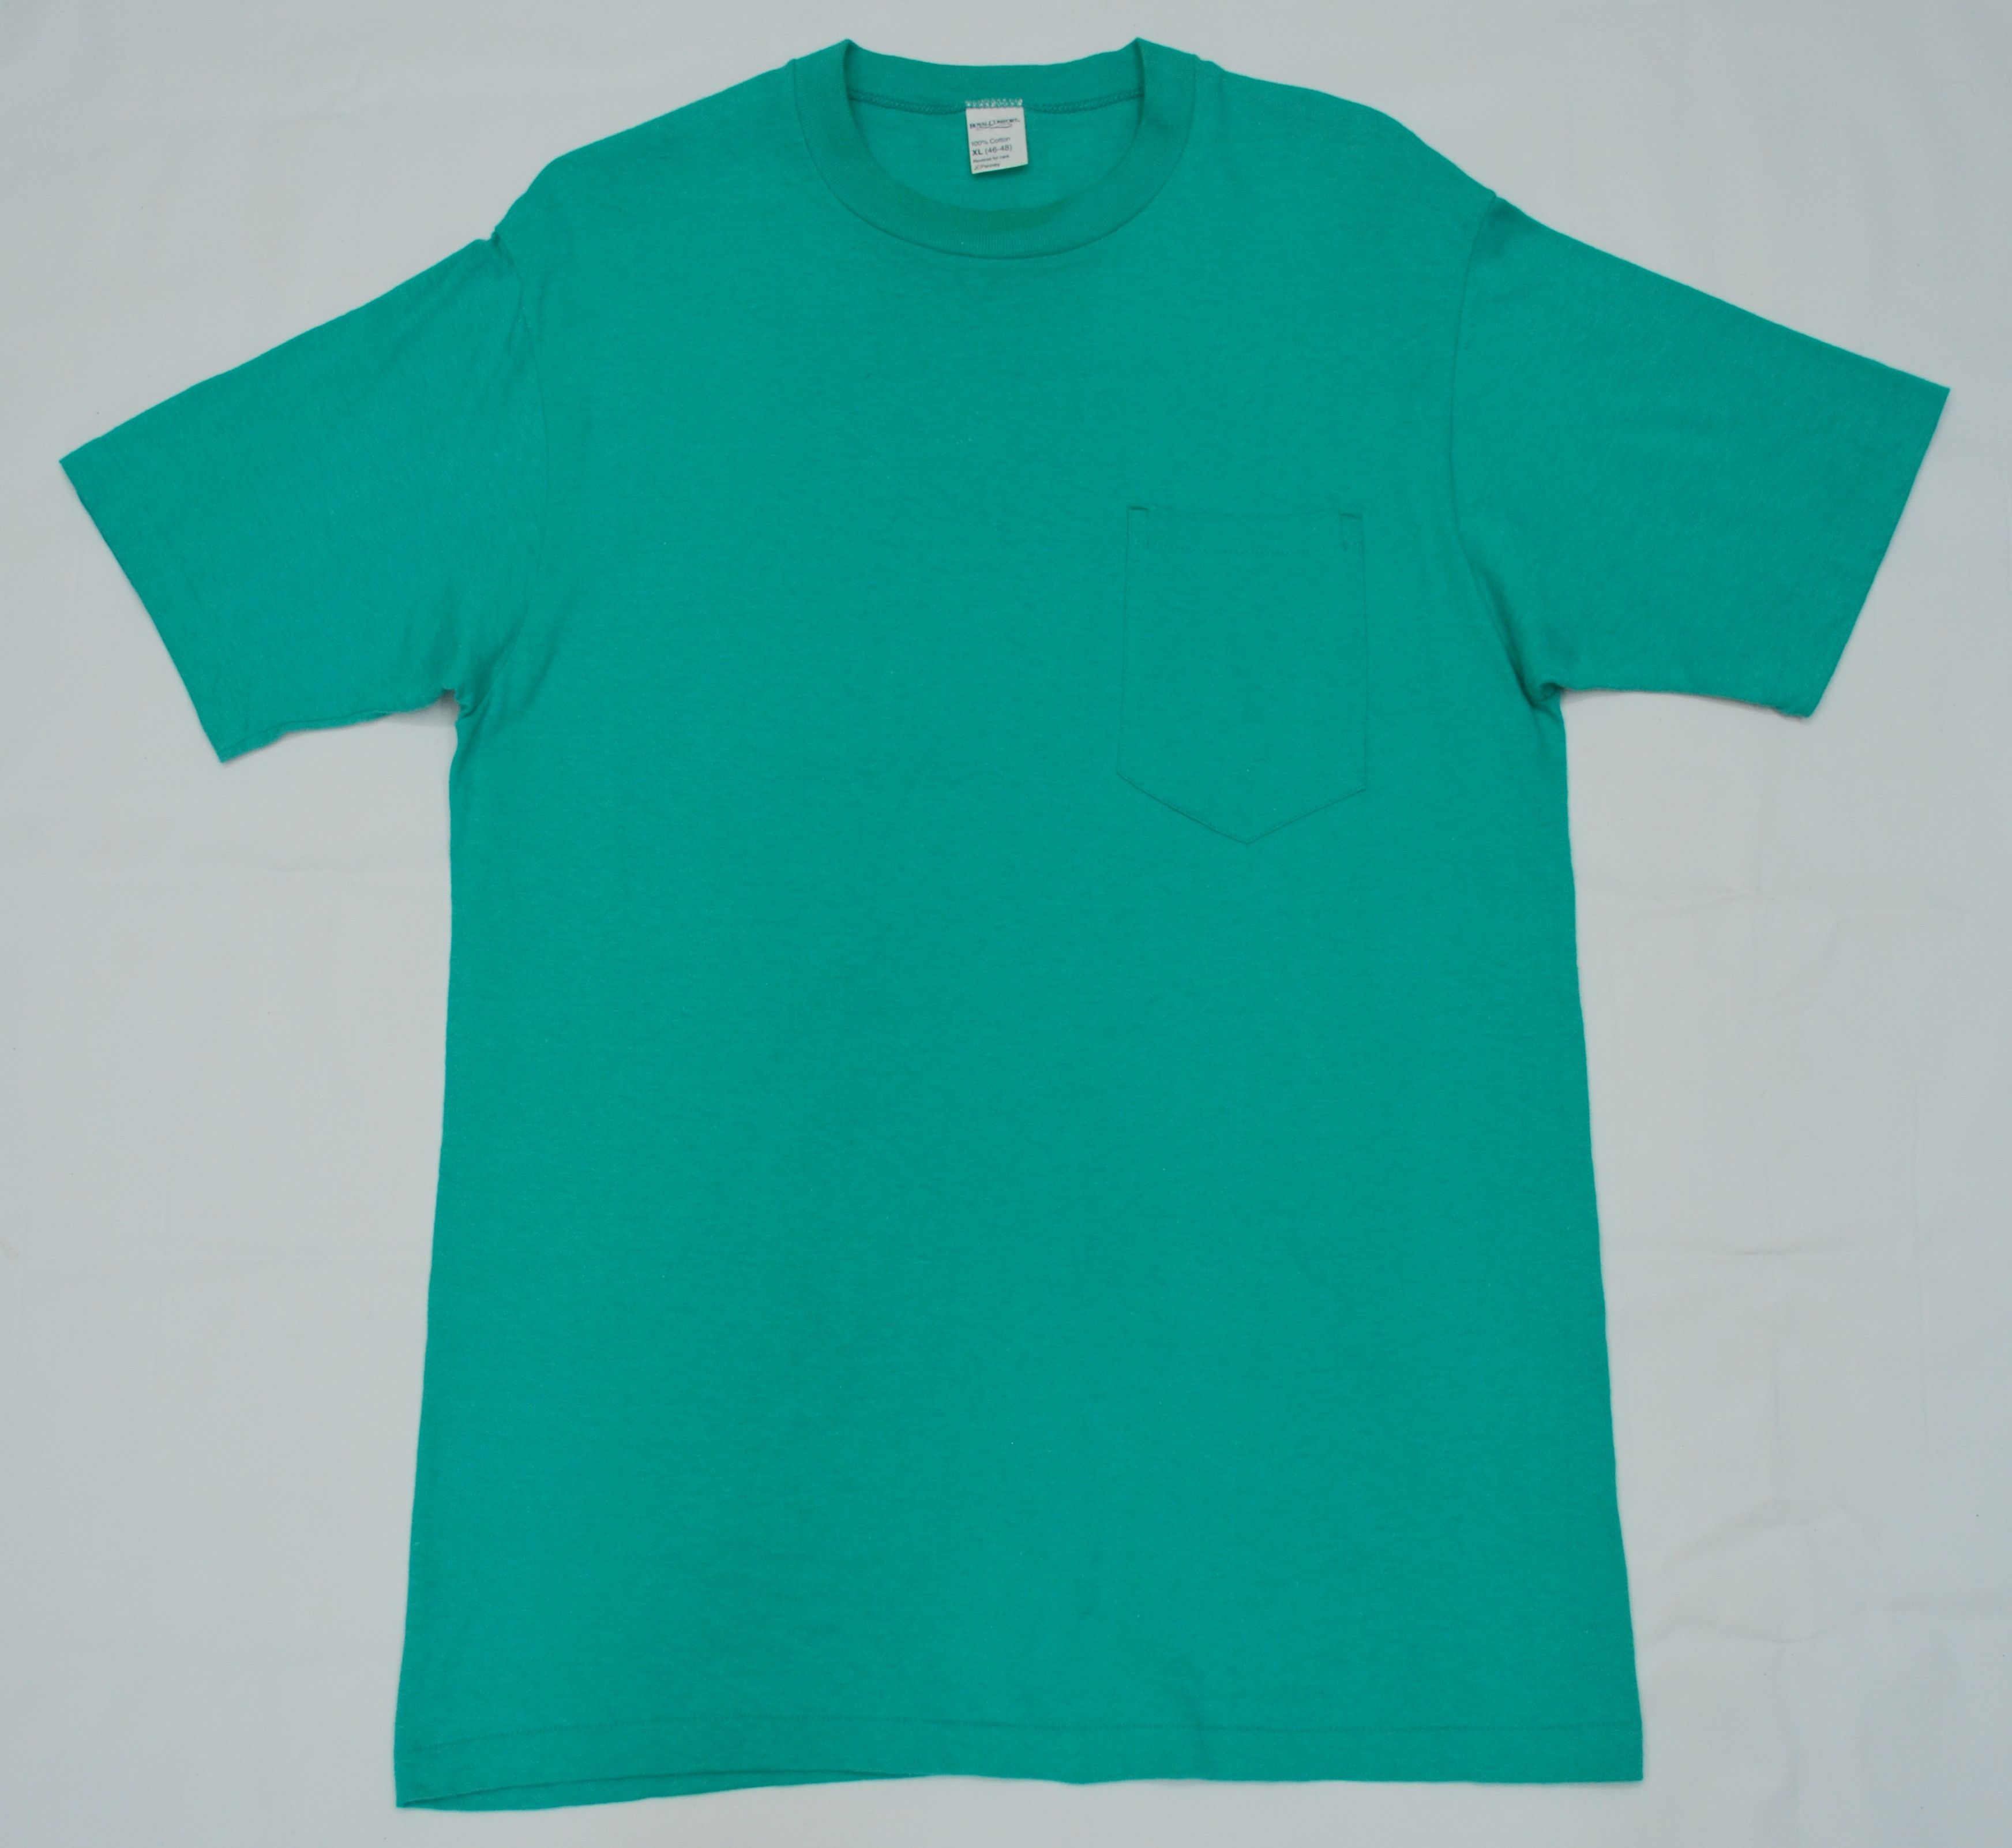 Vintage 90s JCPenney Royal Comfort Blank Pocket Tee Made In USA Size US L / EU 52-54 / 3 - 3 Thumbnail